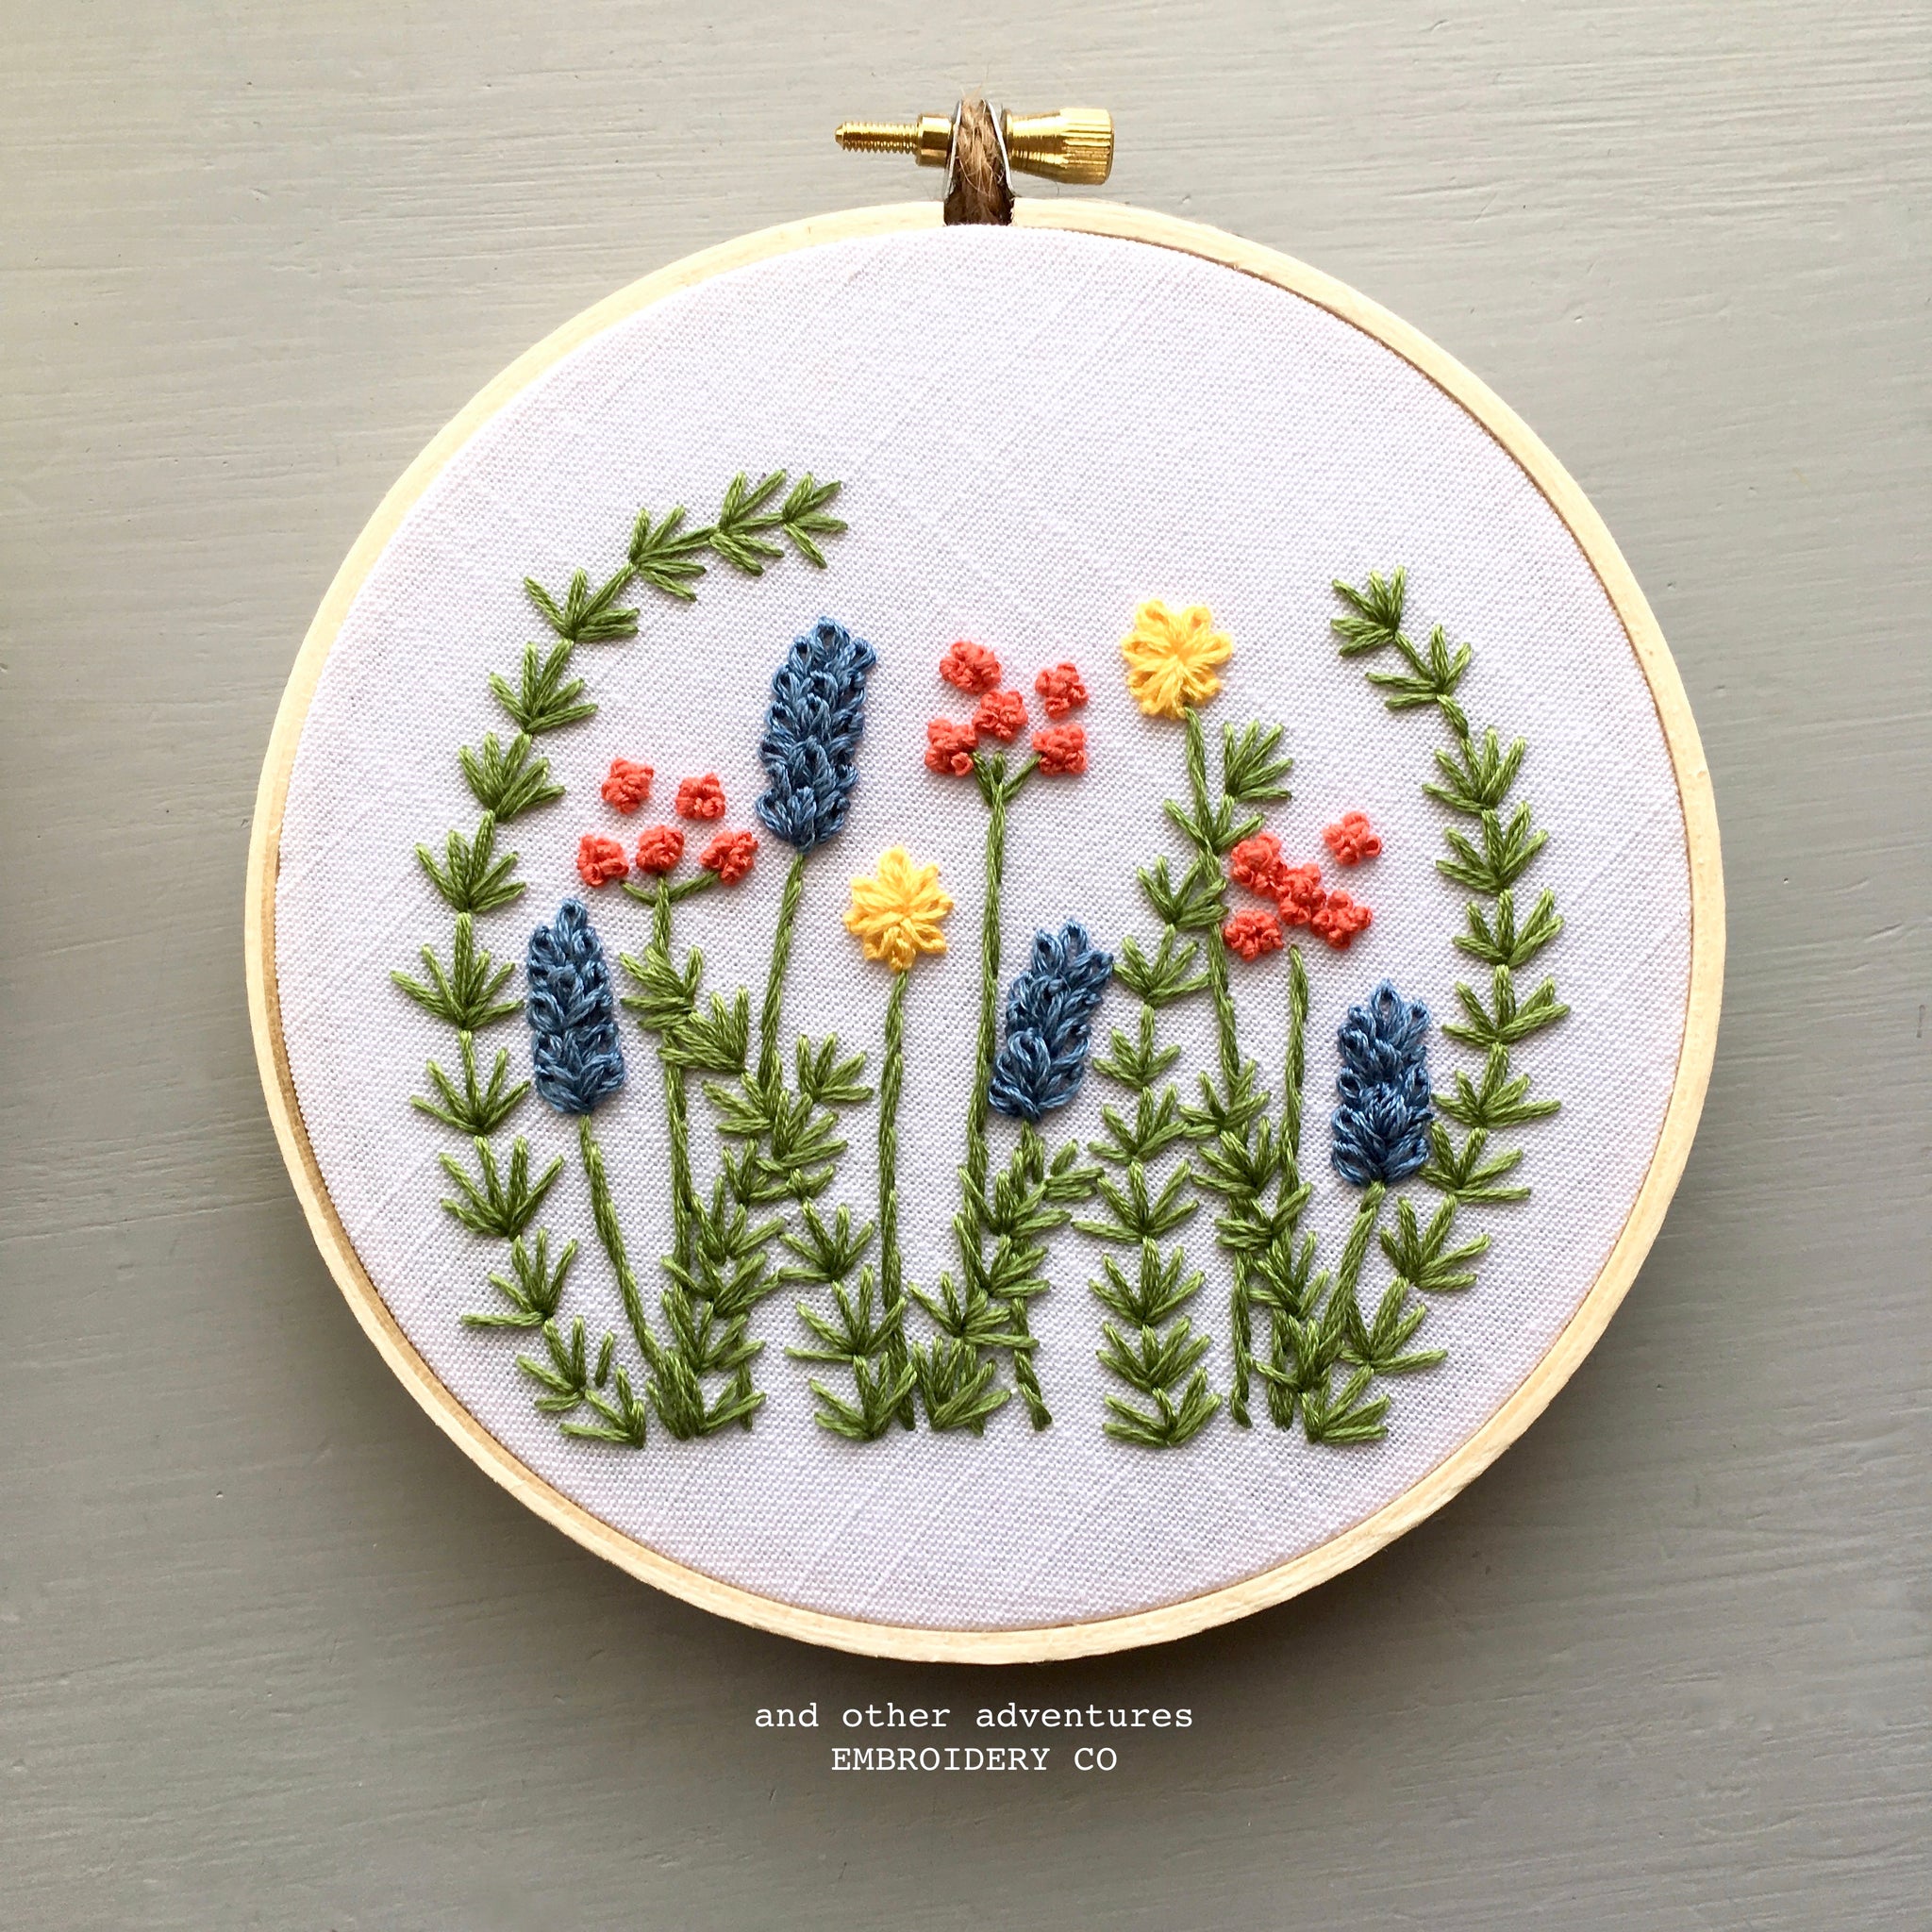 free hand embroidery patterns for beginners